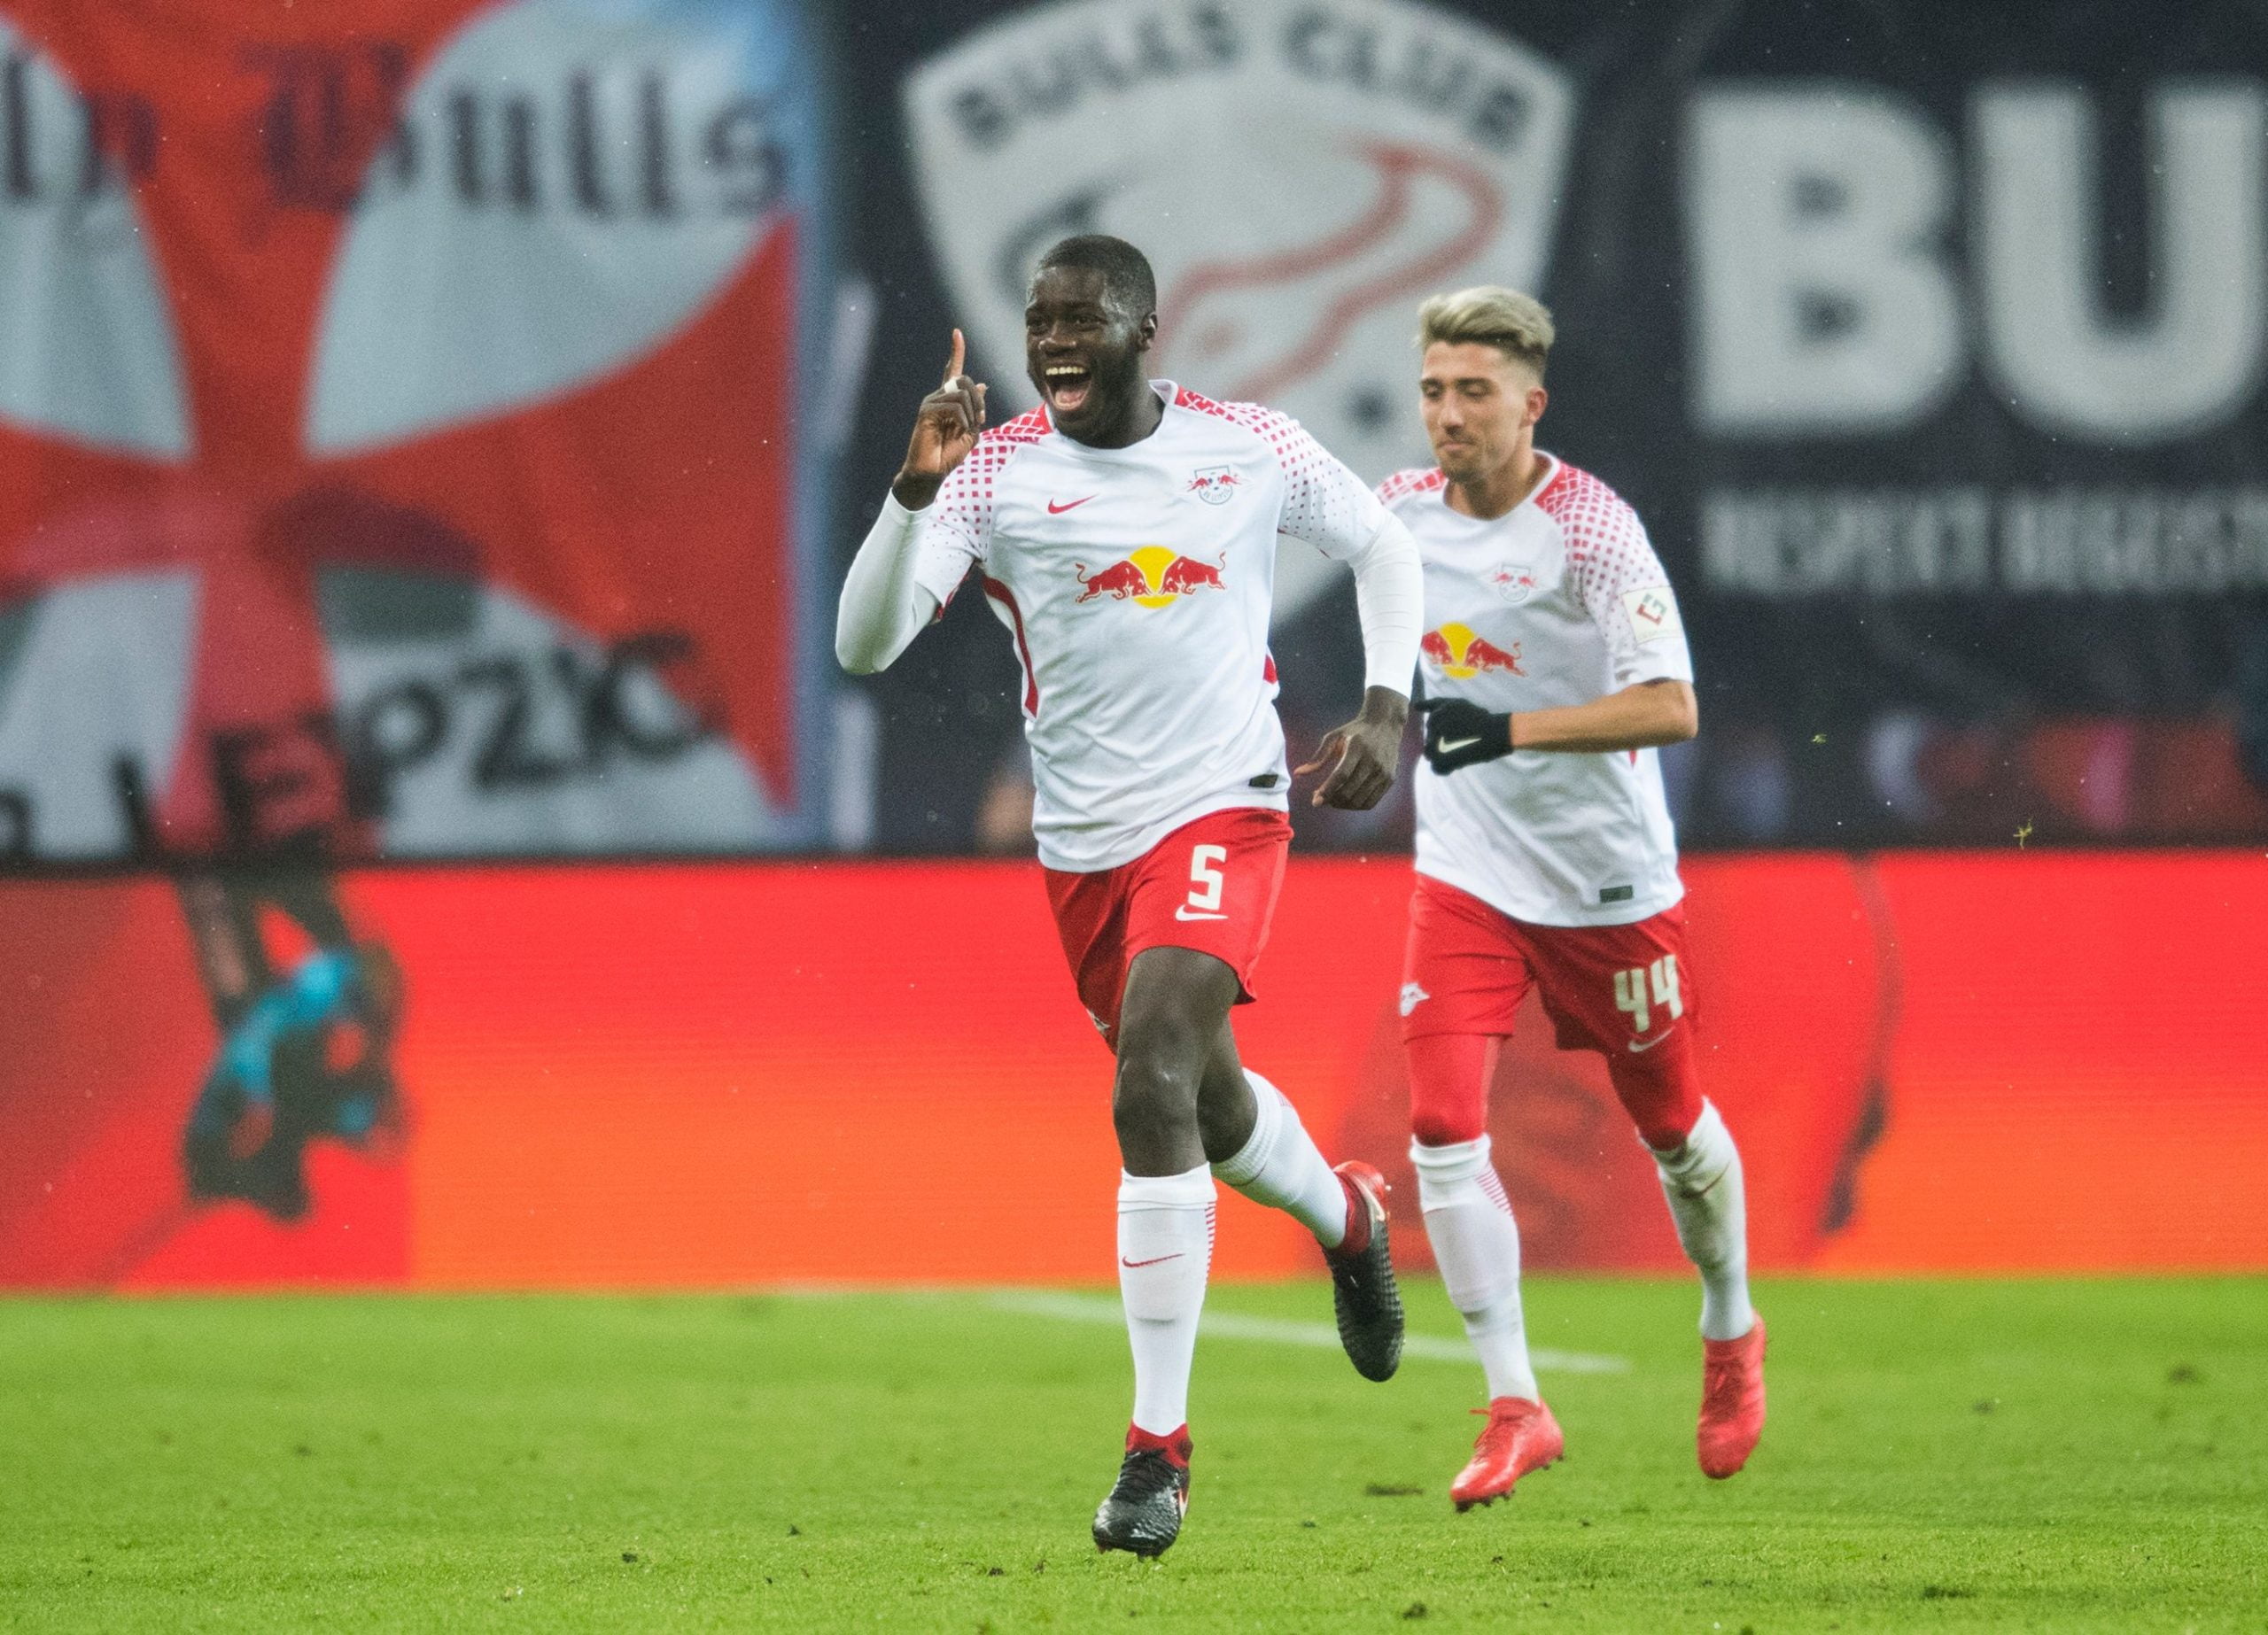 Leipzig´s French defender Dayot Upamecano celebrates scoring during the German first division Bundesliga football match between RB Leipzig and FC Augsburg in Leipzig, eastern Germany on February 9, 2018.  / AFP PHOTO / ROBERT MICHAEL        (Photo credit should read ROBERT MICHAEL/AFP/Getty Images)